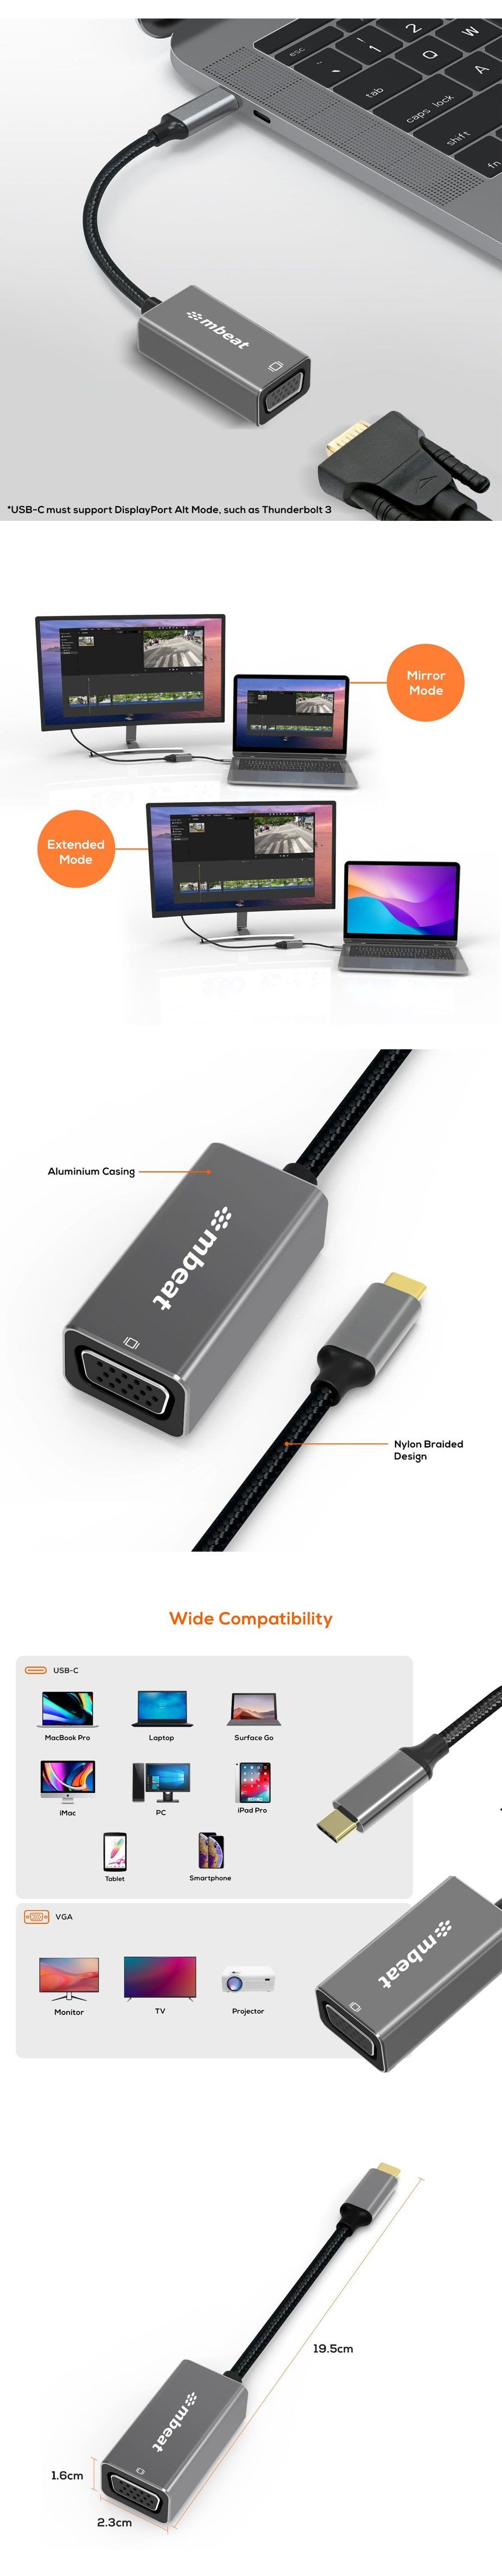 A large marketing image providing additional information about the product mbeat Elite USB-C to VGA Adapter - Additional alt info not provided